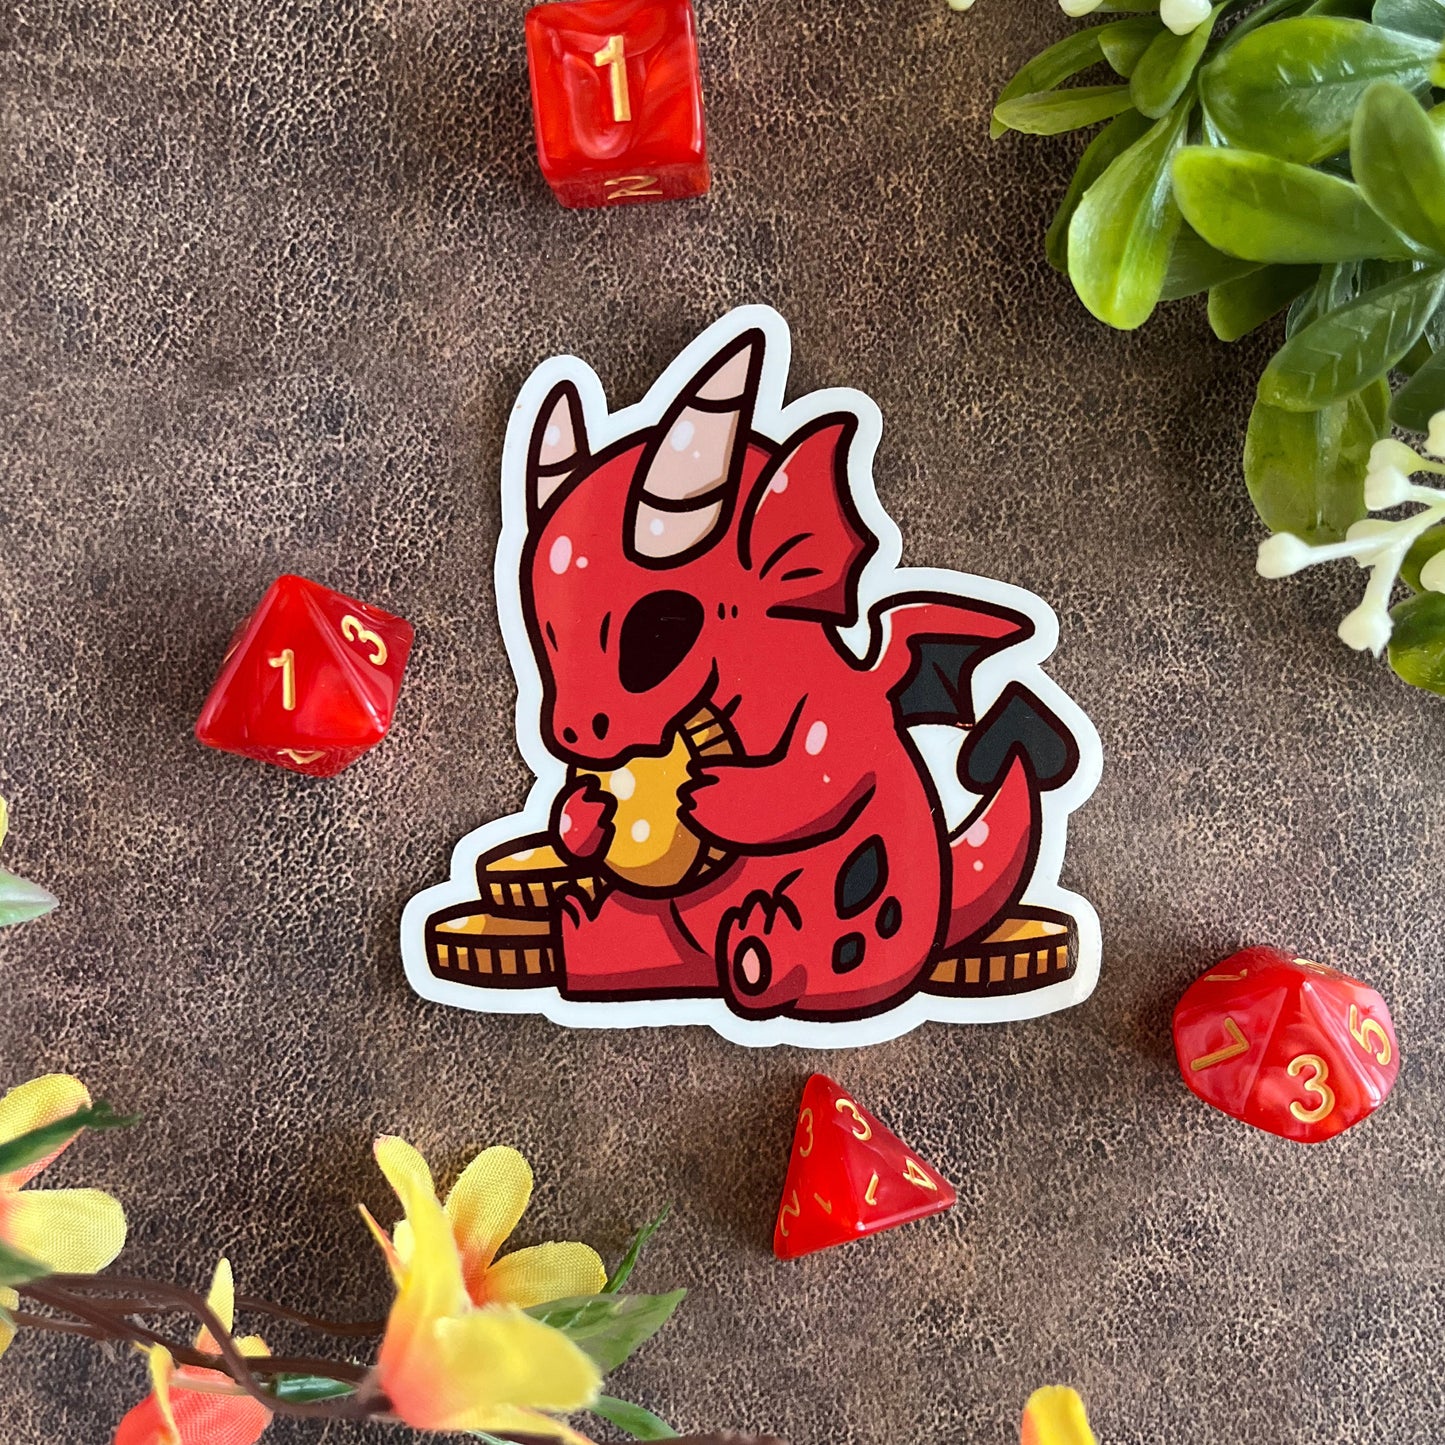 The sticker is accented with dice and flowers with an alternate background.